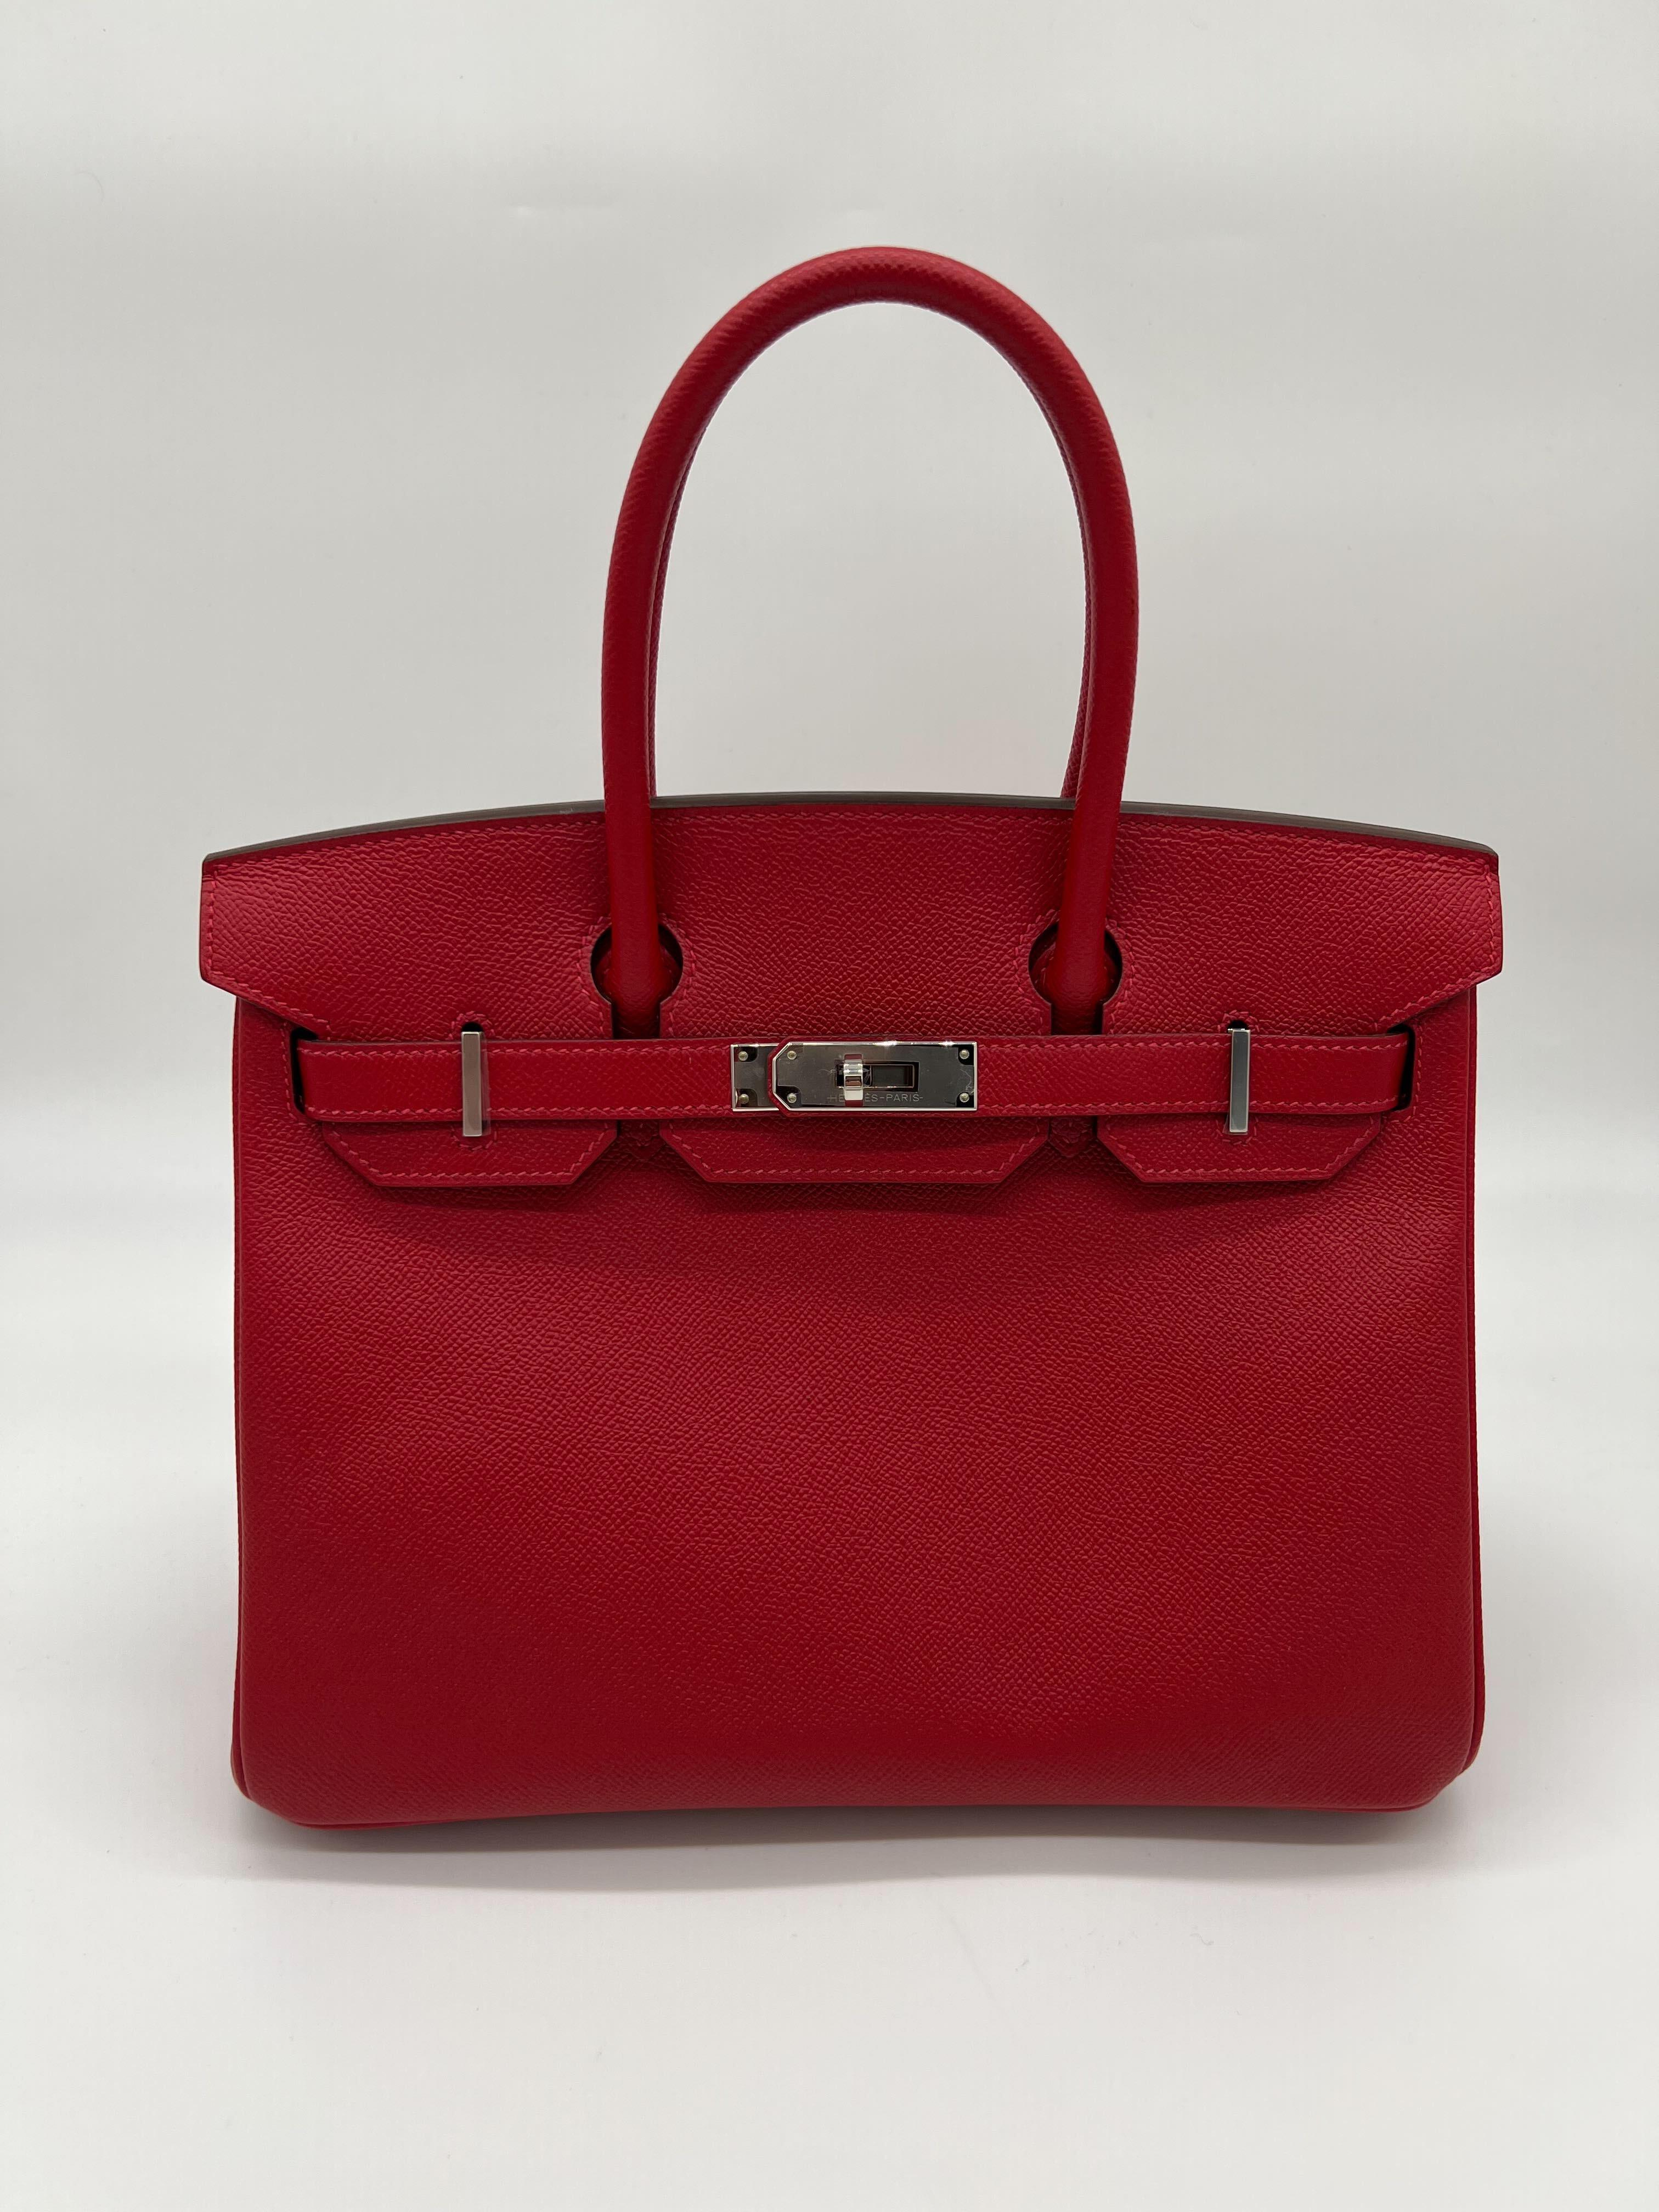 Hermes Birkin 30 Rouge Casaque Epsom Leather Palladium Hardware

Condition: Brand New 
Measurements: (W)30cm × (H)21cm × (D)15cm
Bag Material: Epsom Leather
Hardware Material: Palladium plated

*Comes with full original packaging. 
*Includes